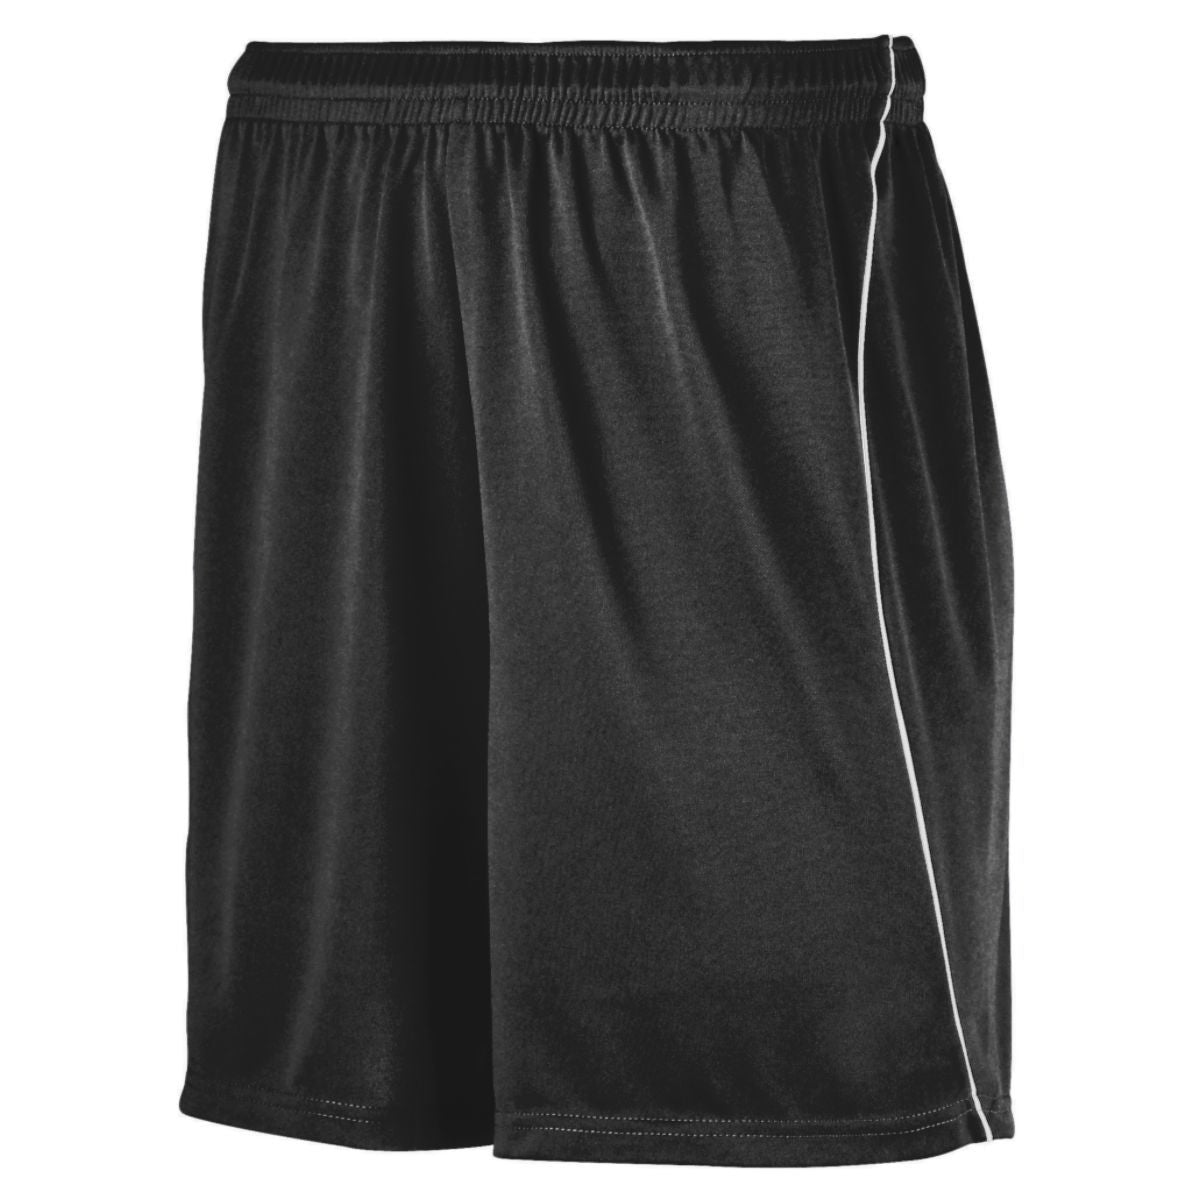 Wicking Soccer Shorts With Piping 460